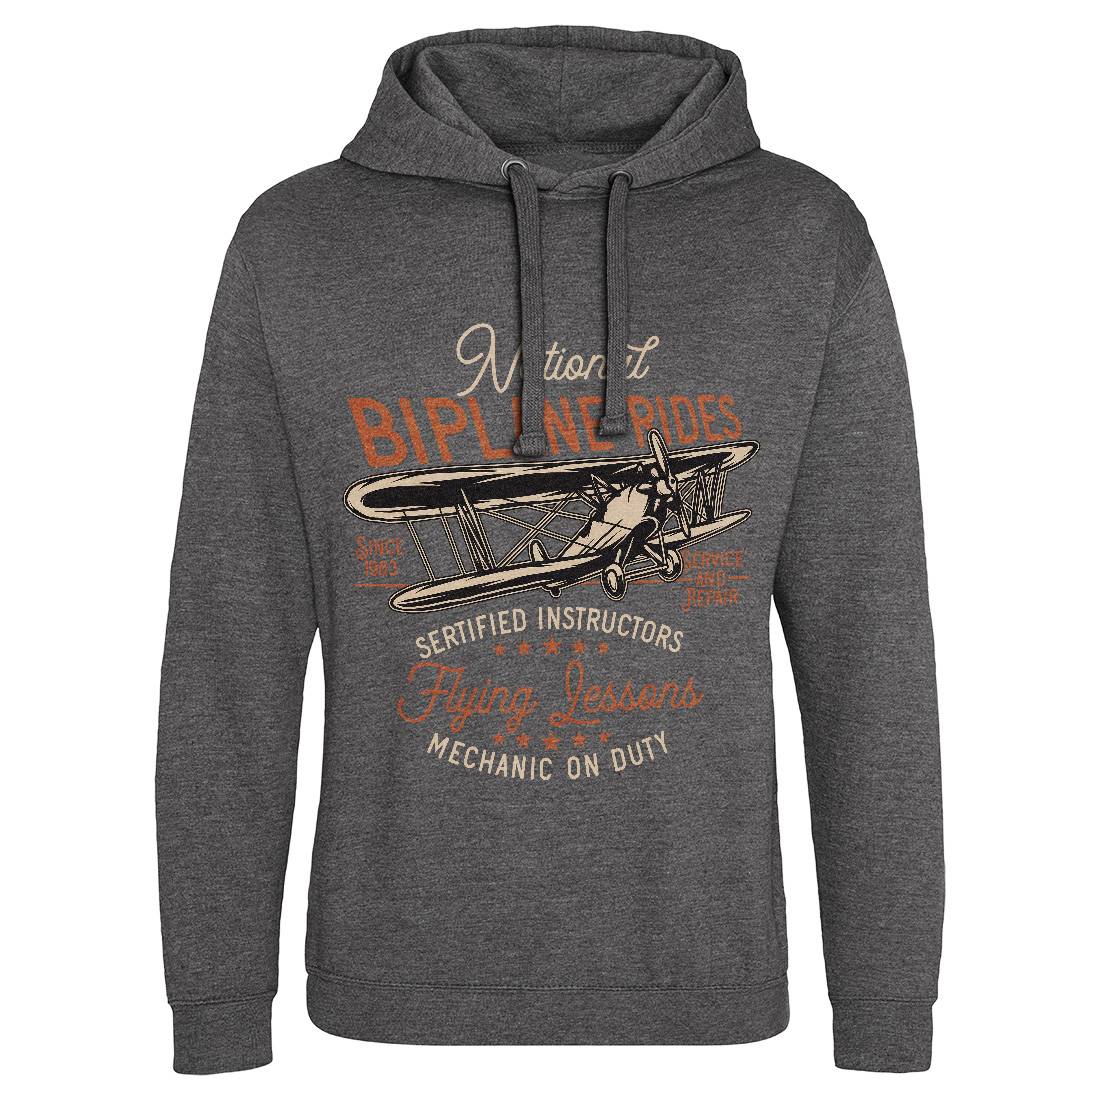 Biplane Rides Mens Hoodie Without Pocket Vehicles D910